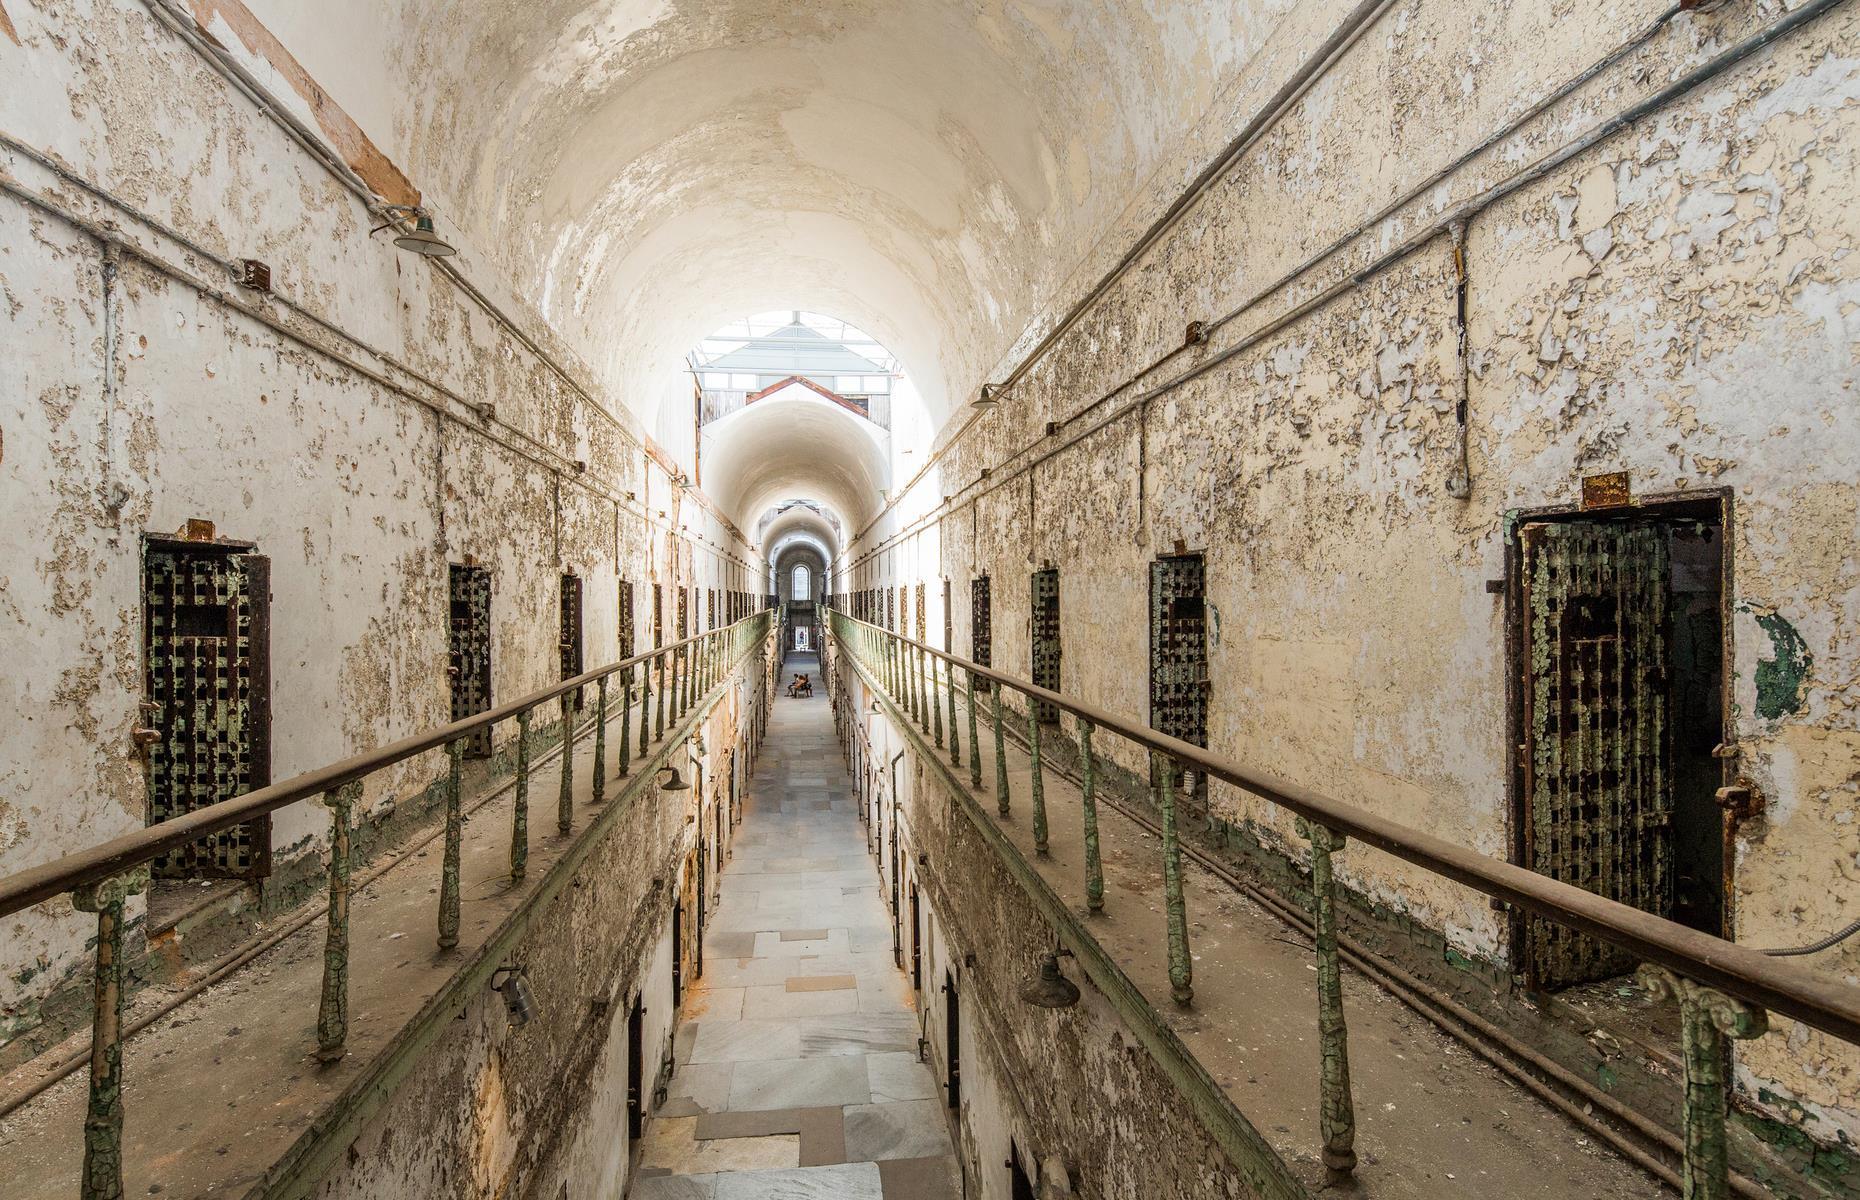 A jail with a history of notorious inmates, USA 